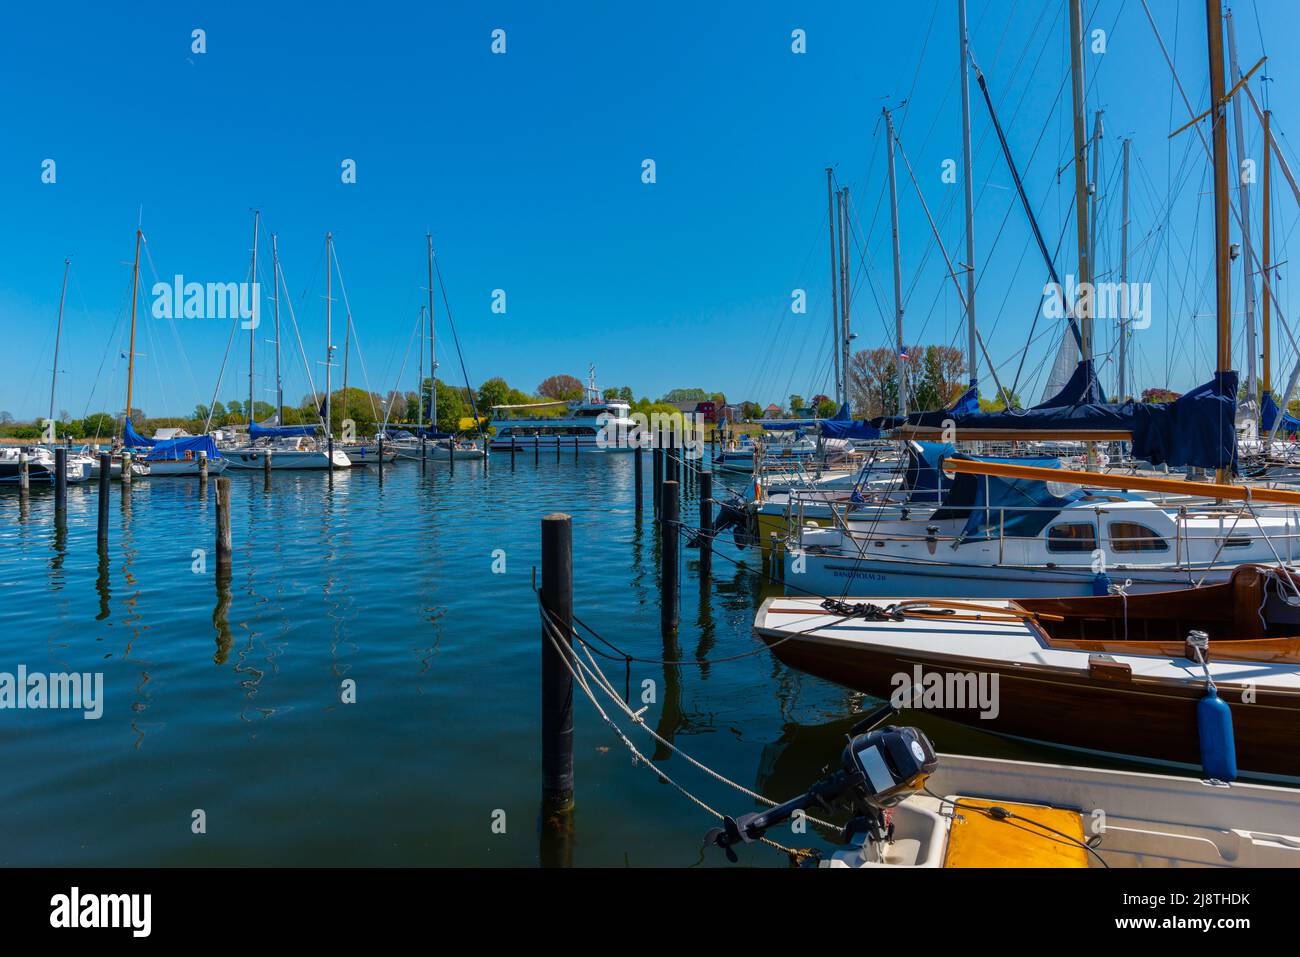 Marina of Arnis on the Schlei Fjord, Germany´s smallest town with about 300 inhabitants, Schleswig-Holstein, Northern Germany, Europe Stock Photo